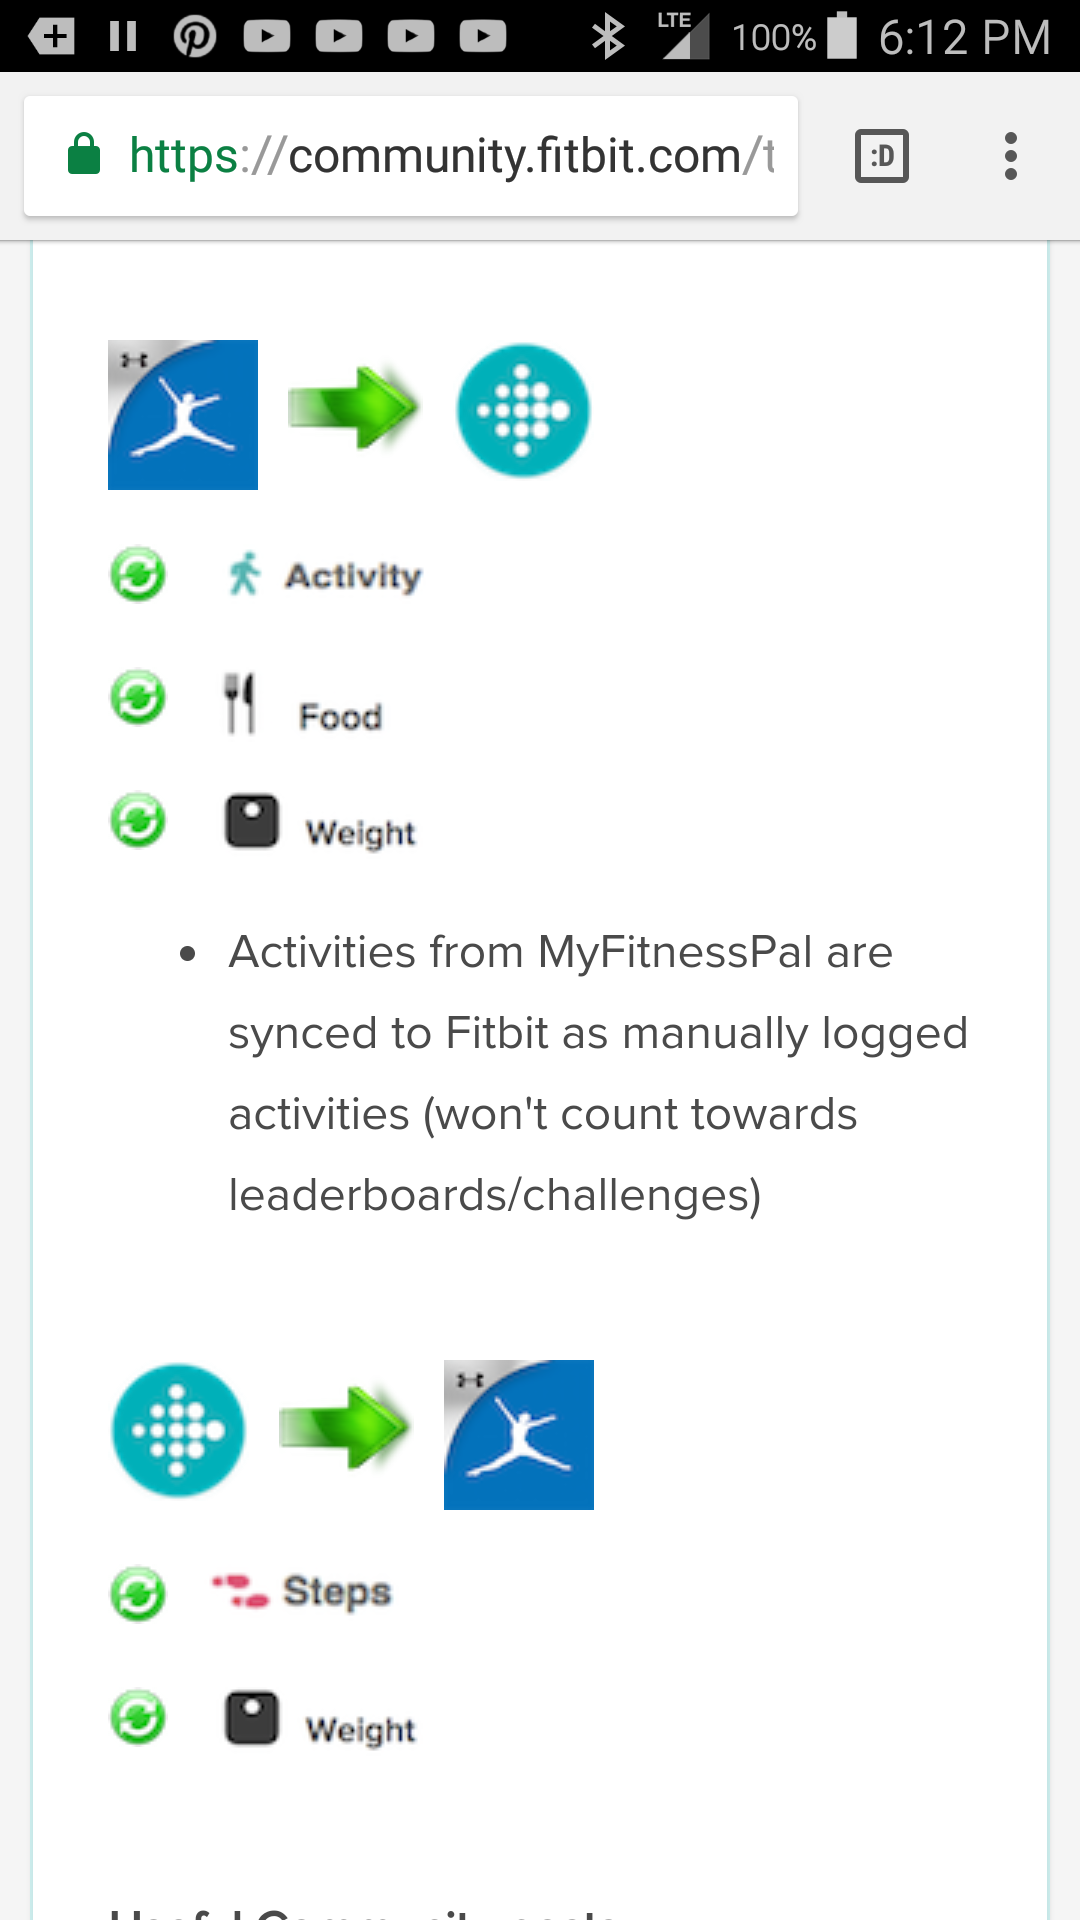 sync mfp with fitbit